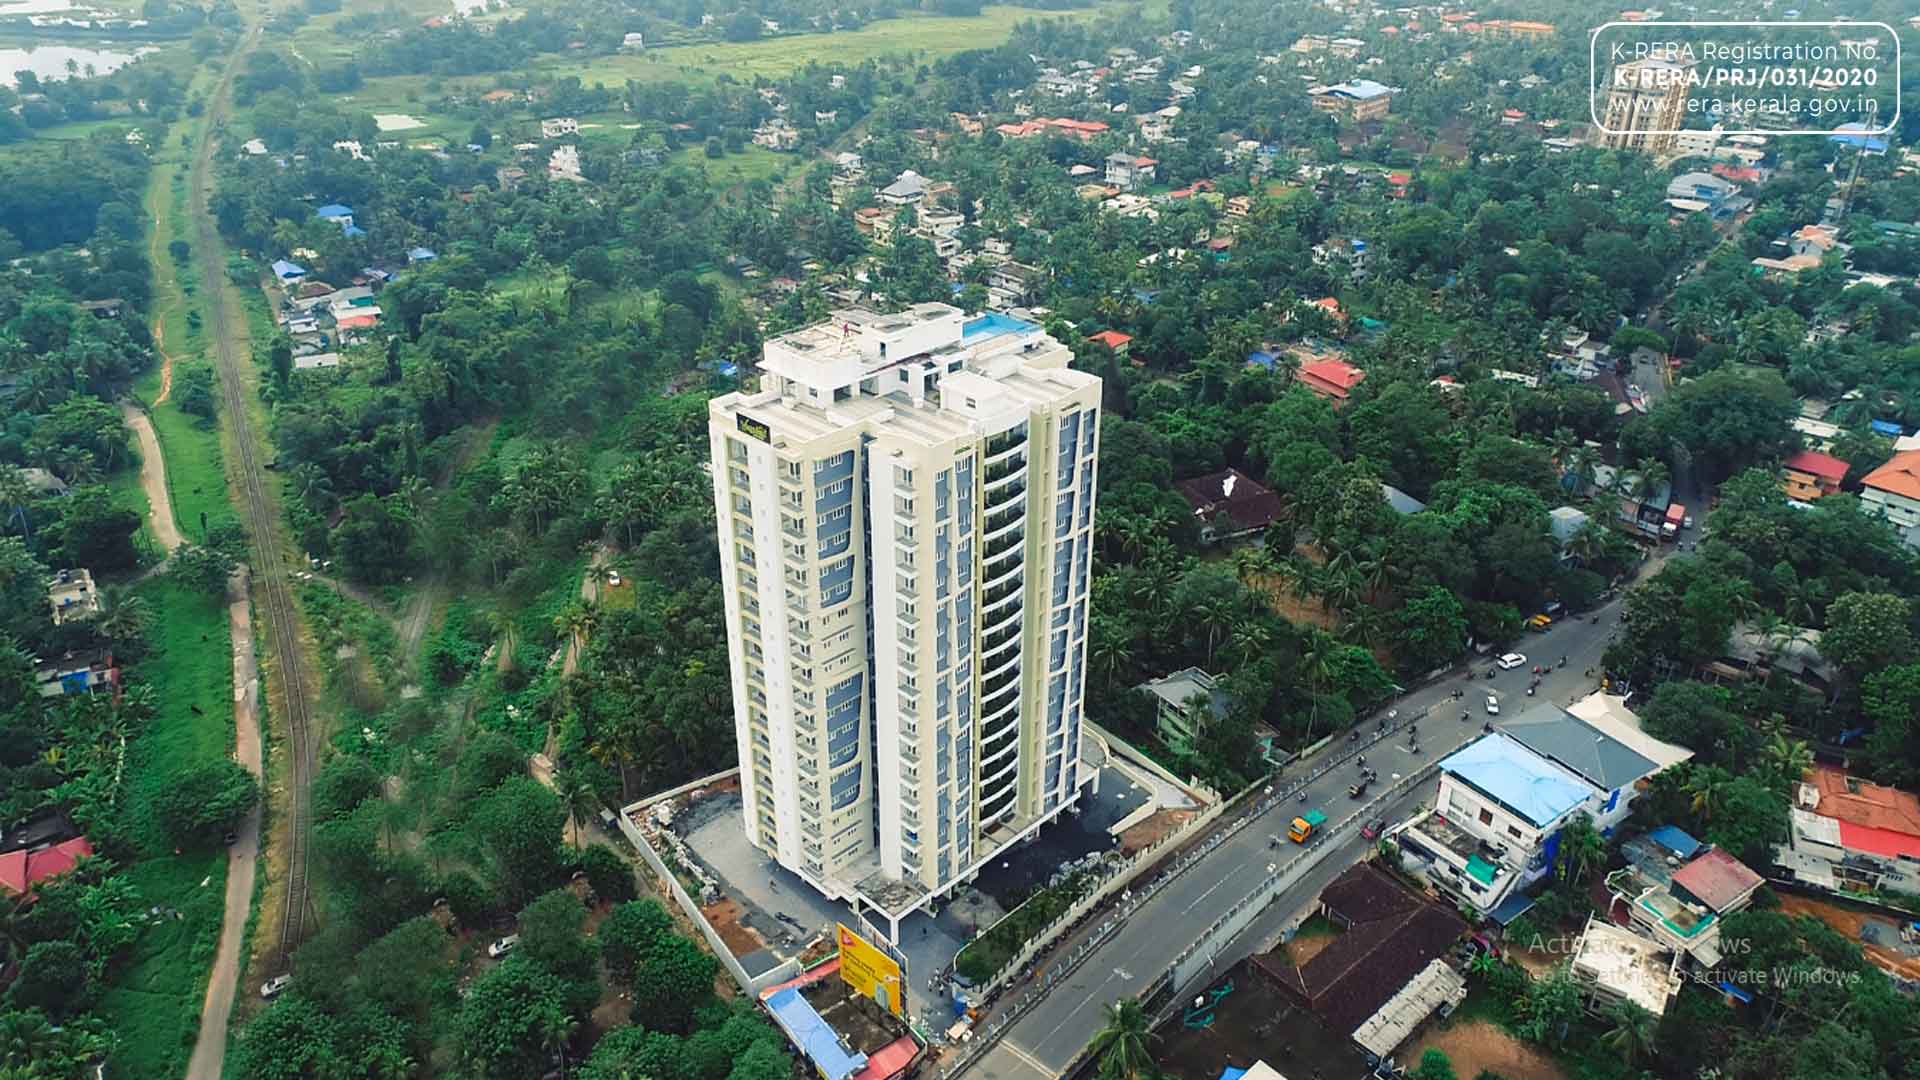 10 REASONS TO CHOOSE APARTMENTS IN KOCHI<